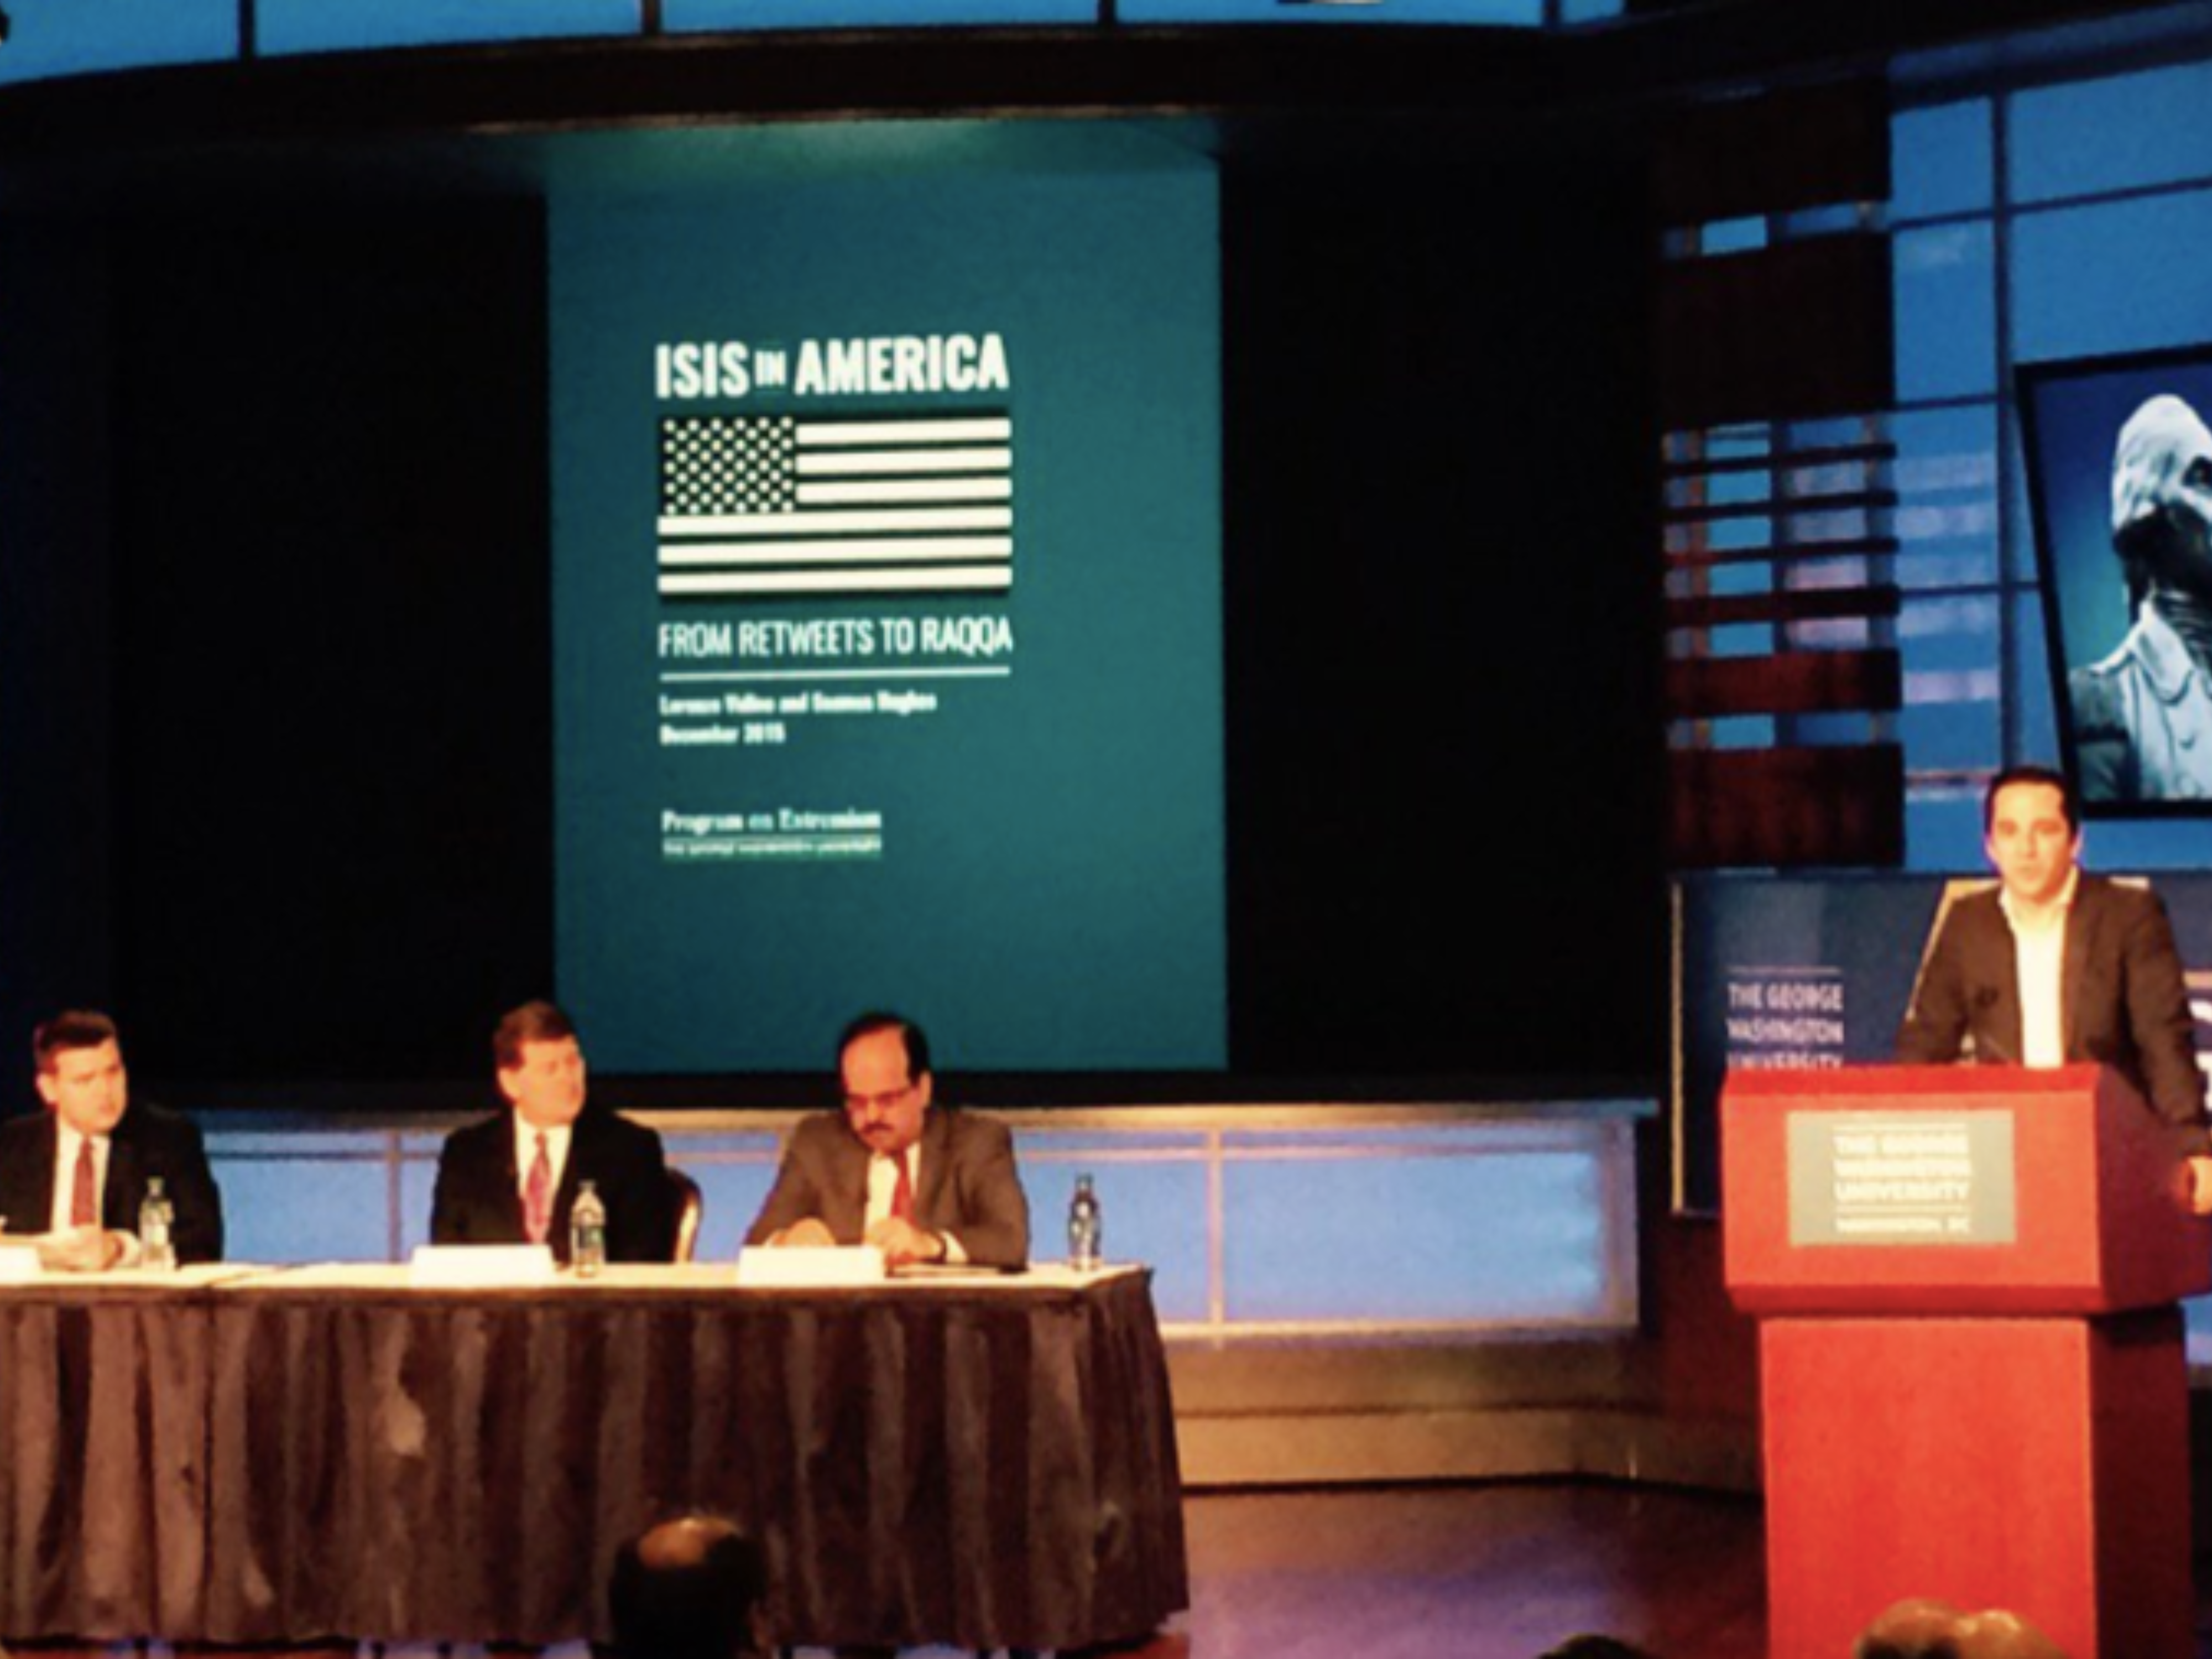 Image of panelists from ISIS in America: From Retweets to Raqqa event.